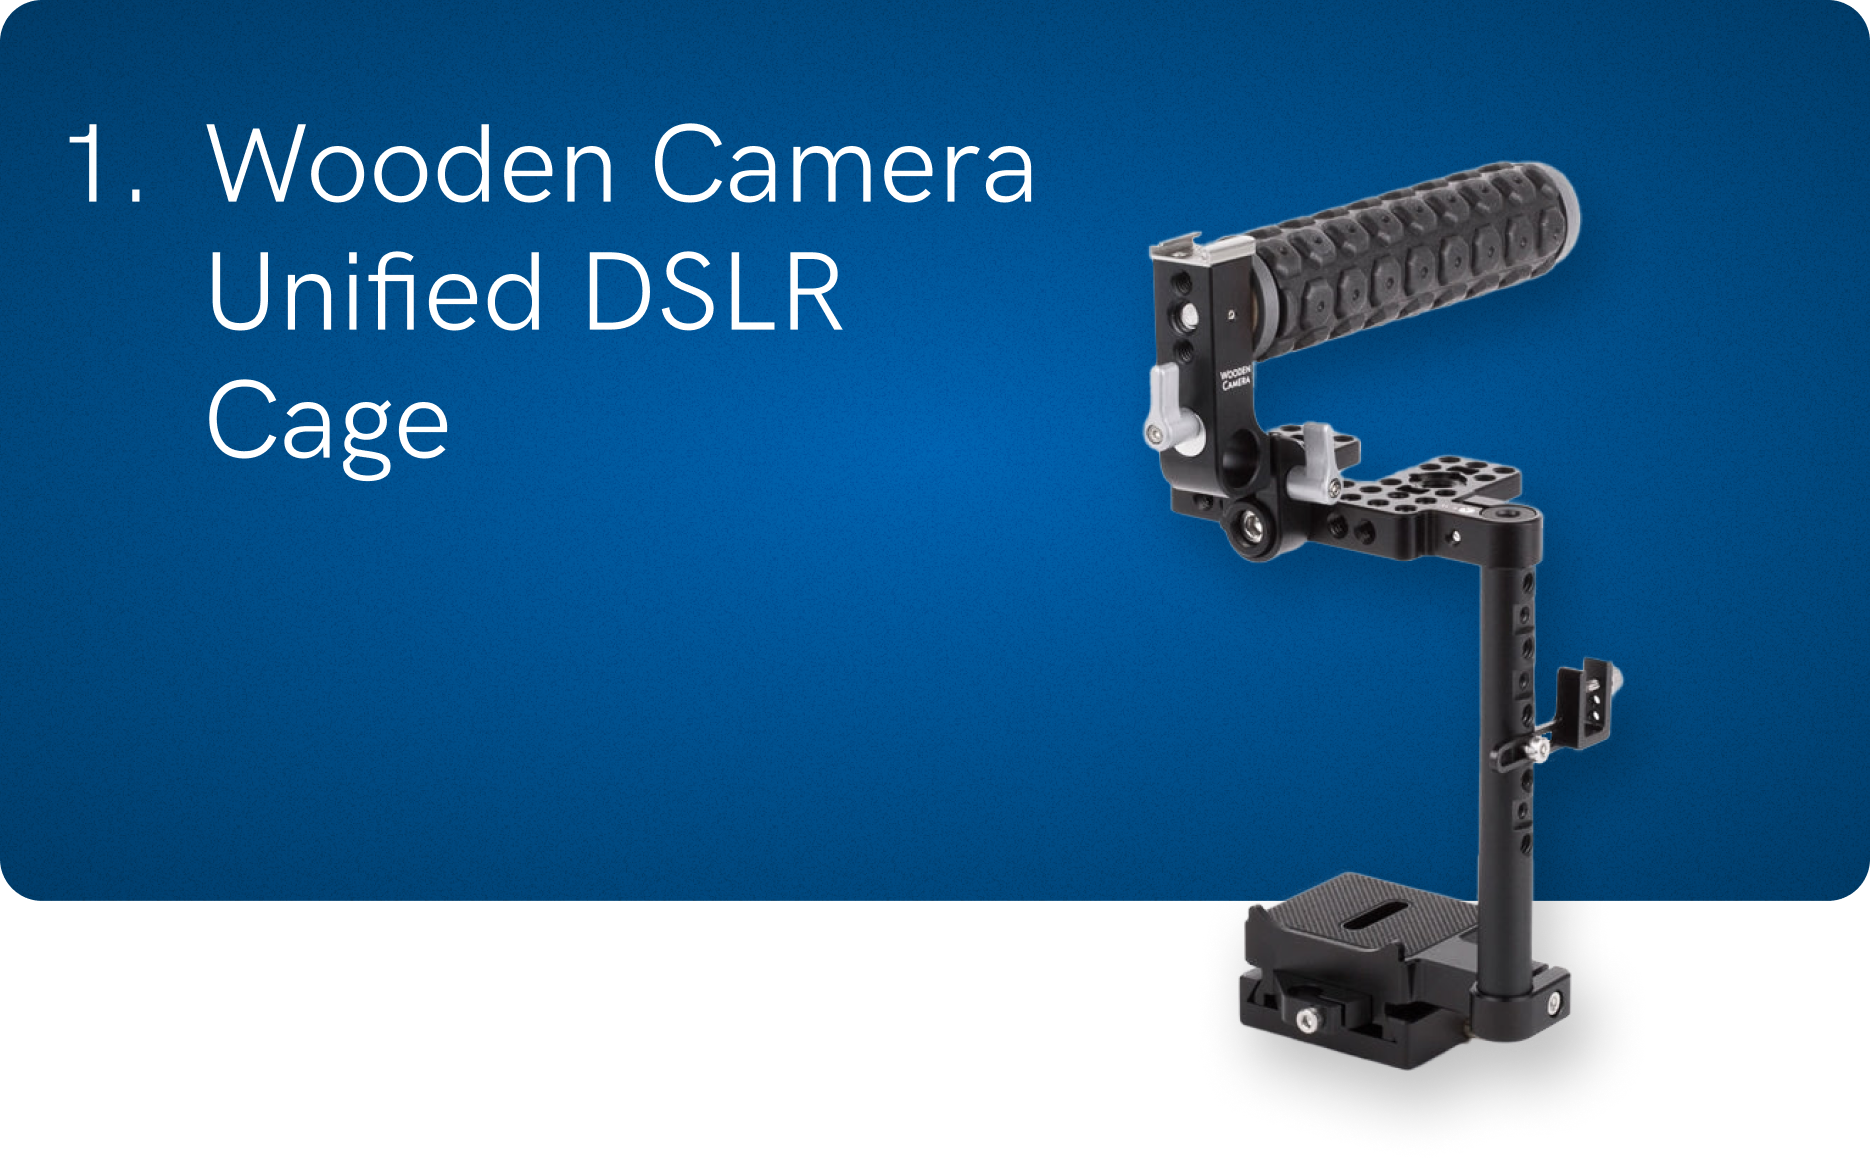 1. Unified DSLR Cage